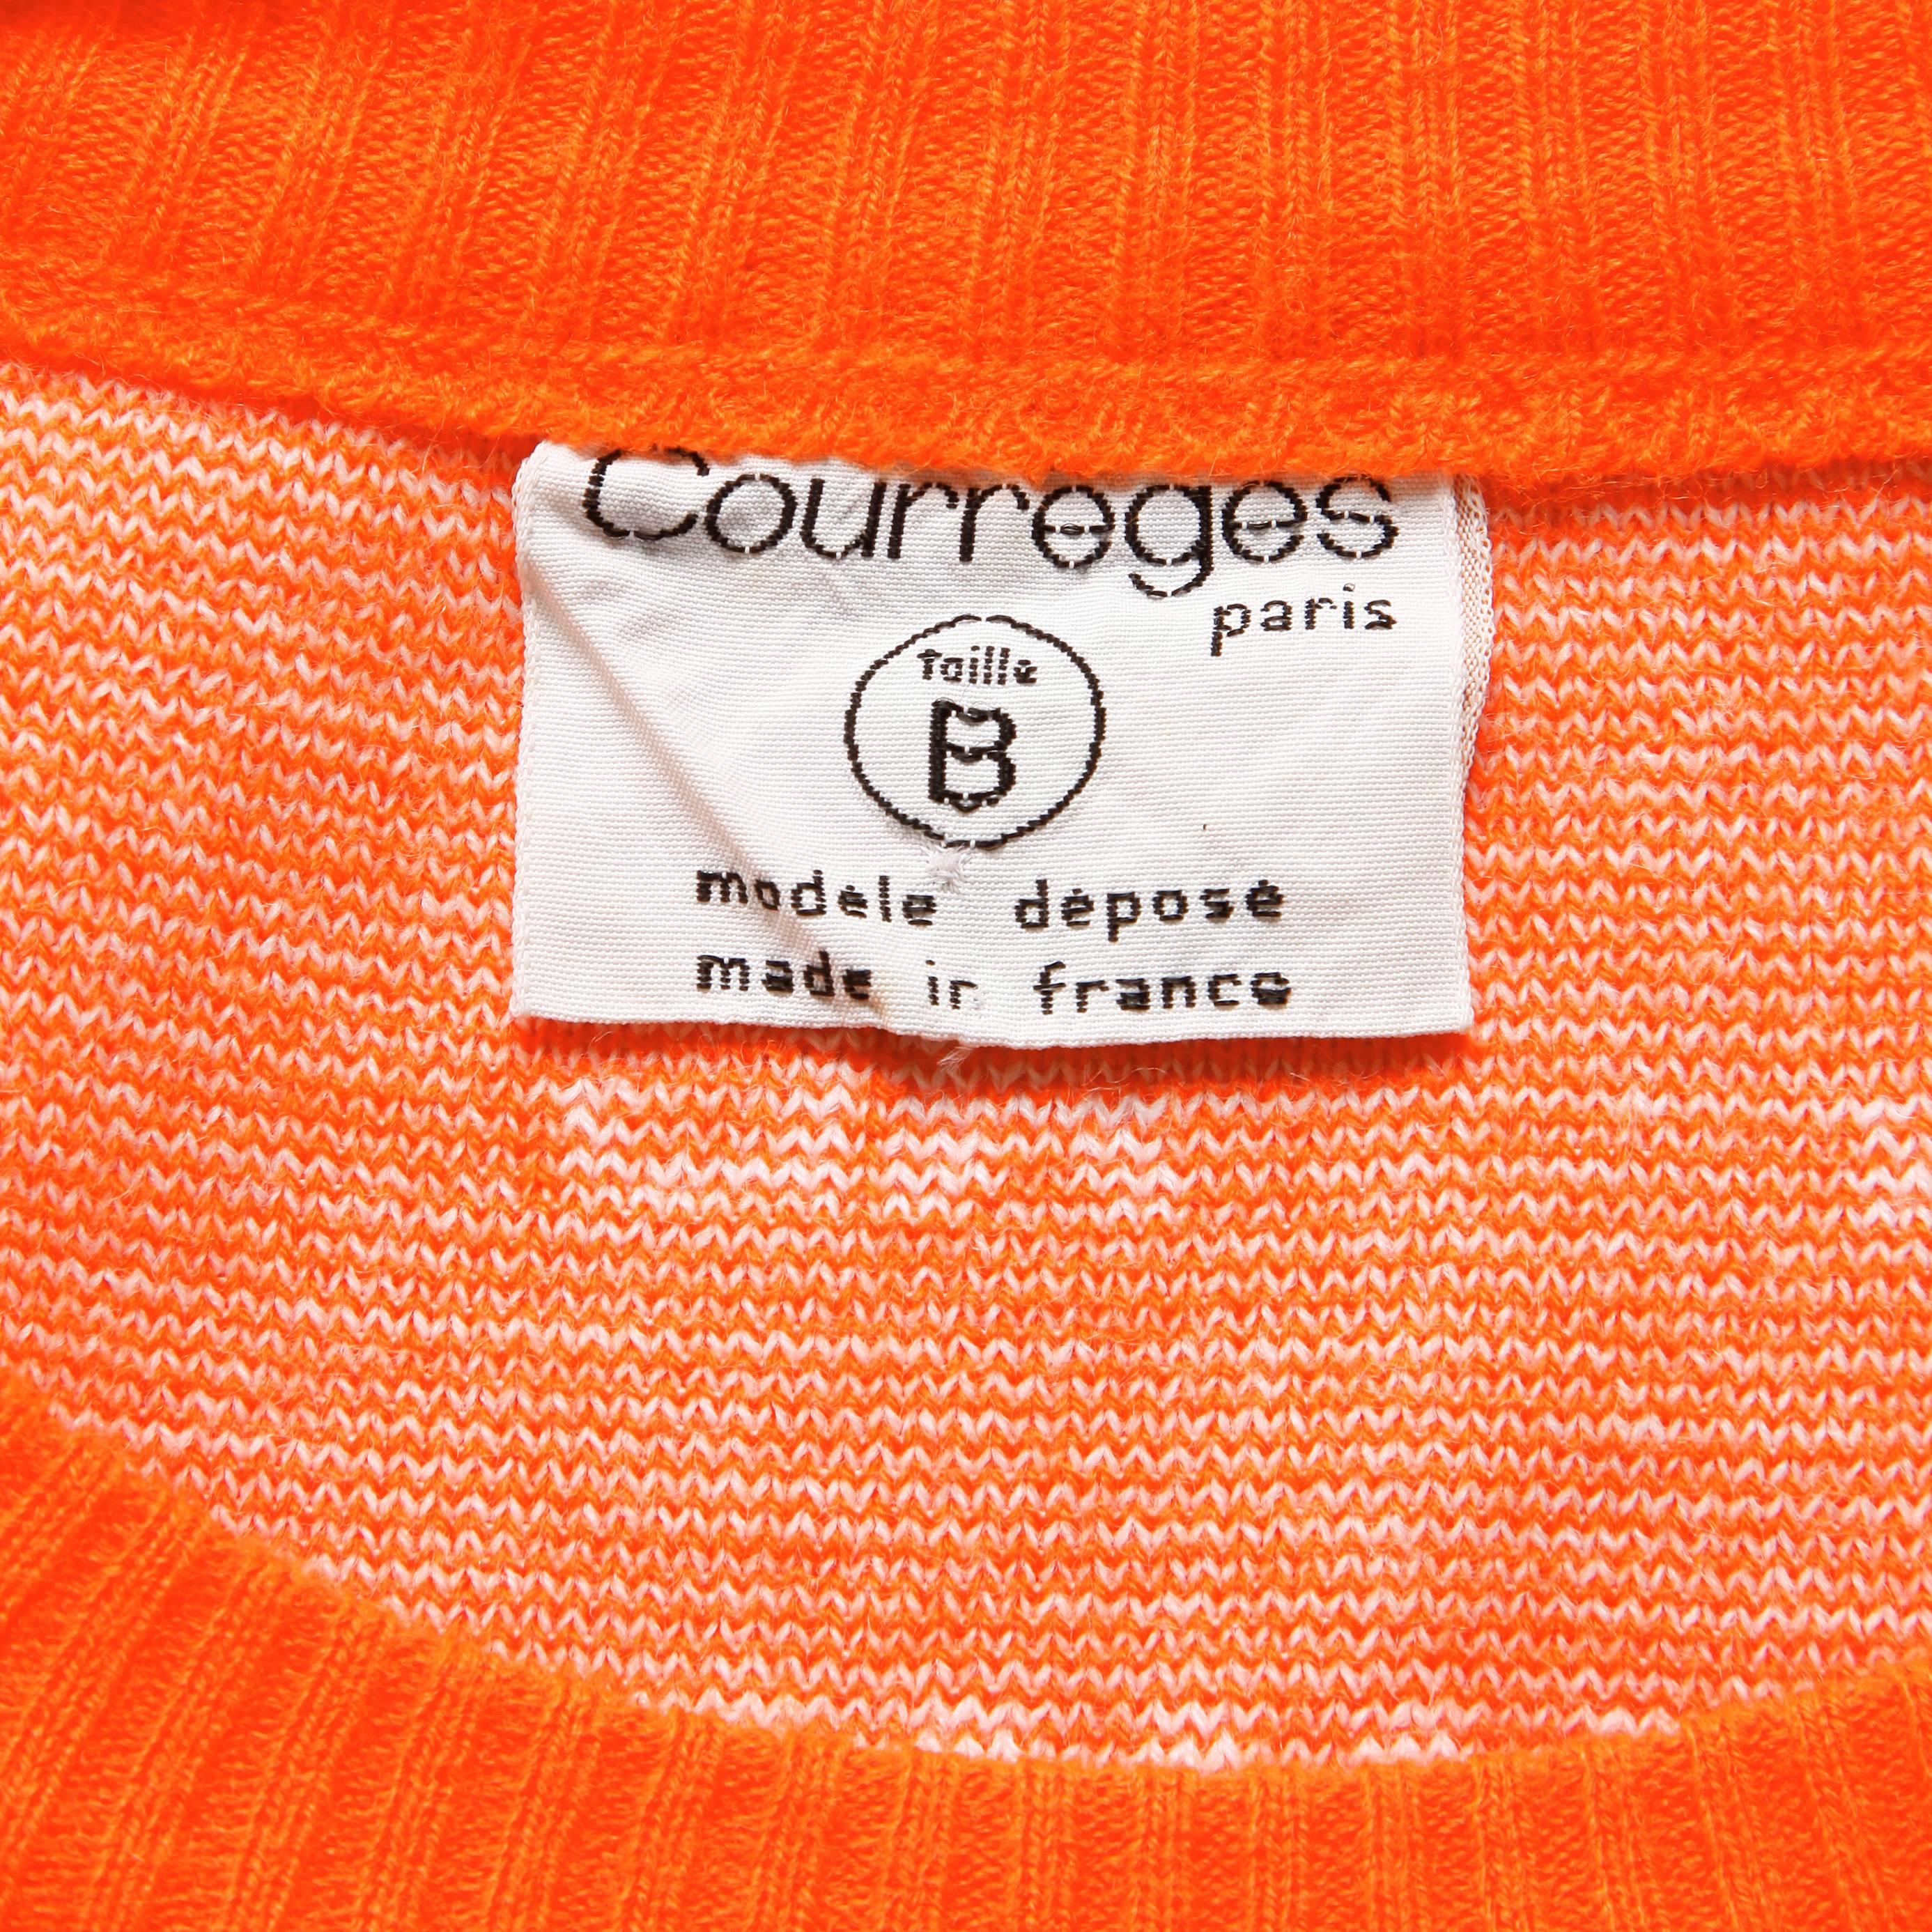 Bright orange vintage Courreges sweater vest from the 1970s with the Courreges logo throughout the piece. Unlined. Pulls on. The bust measures 34-36